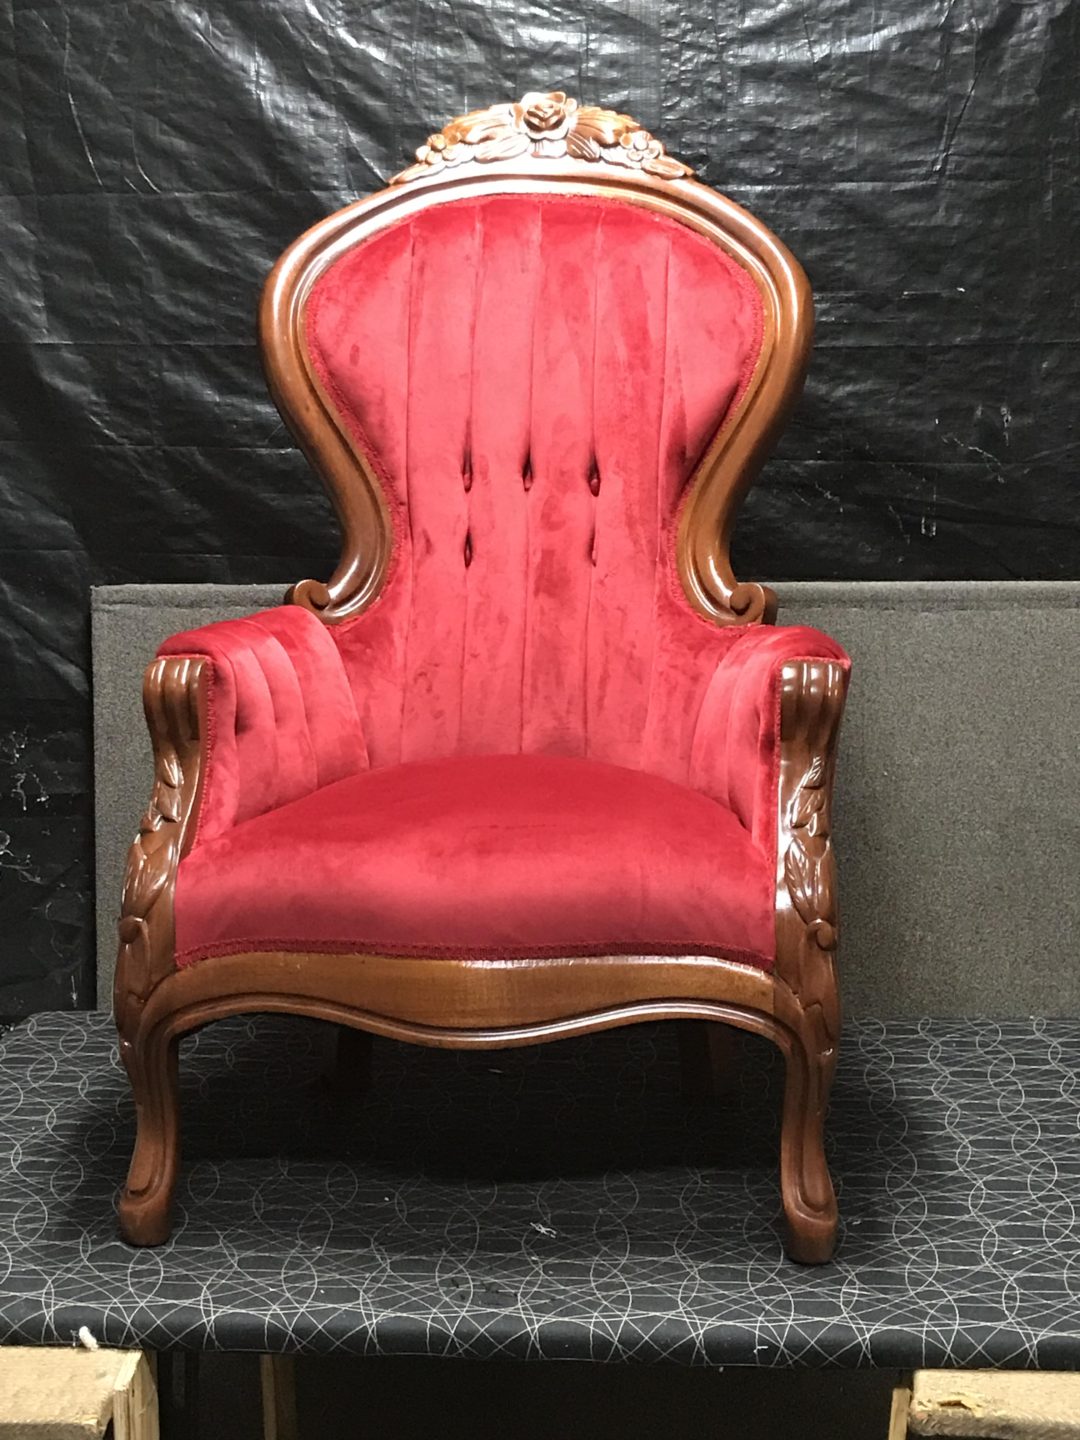 Red Antique Arm Chair